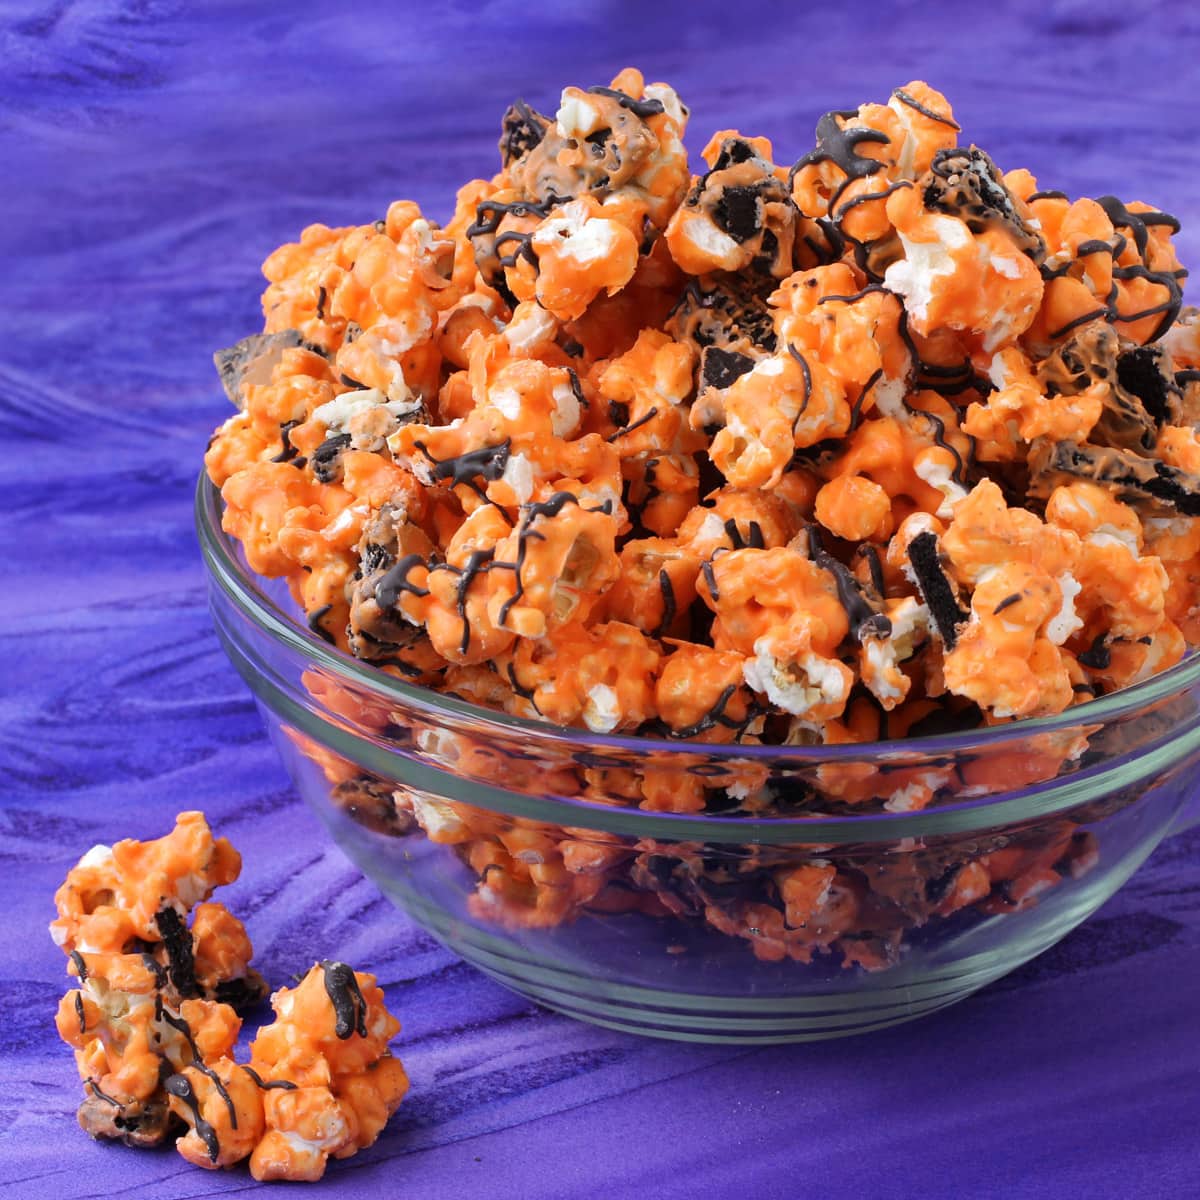 Orange and black cookies and cream Halloween popcorn served in a clear bowl on a purple watercolor table.